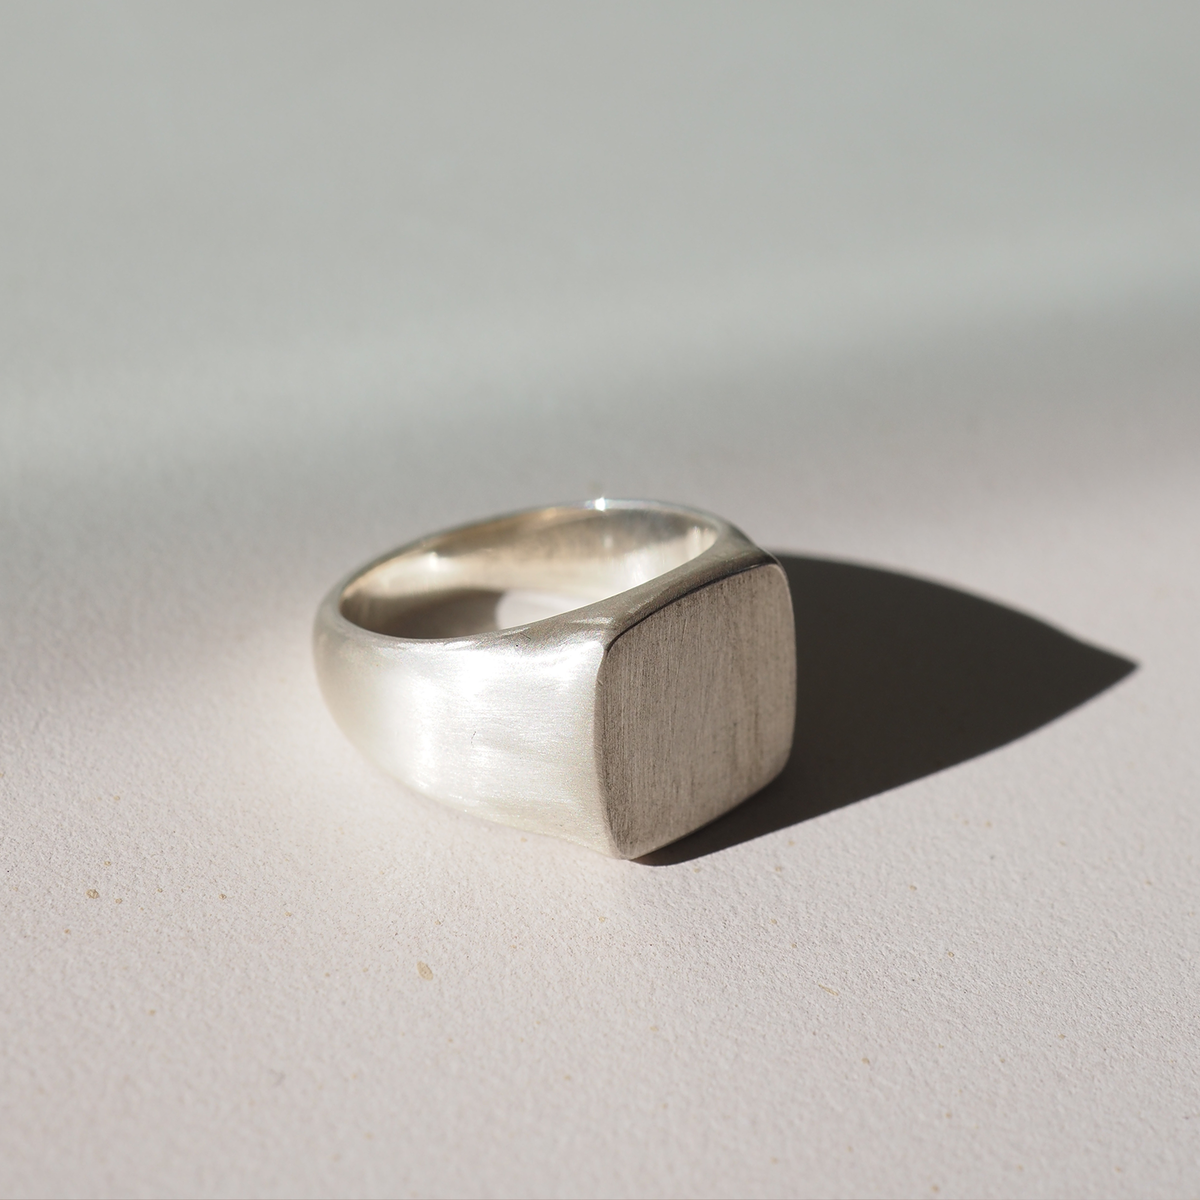 Based on a medium ring size, the face of our square signet measures 12mm square. The underside features a half round band measuring from a 3mm minimum width.